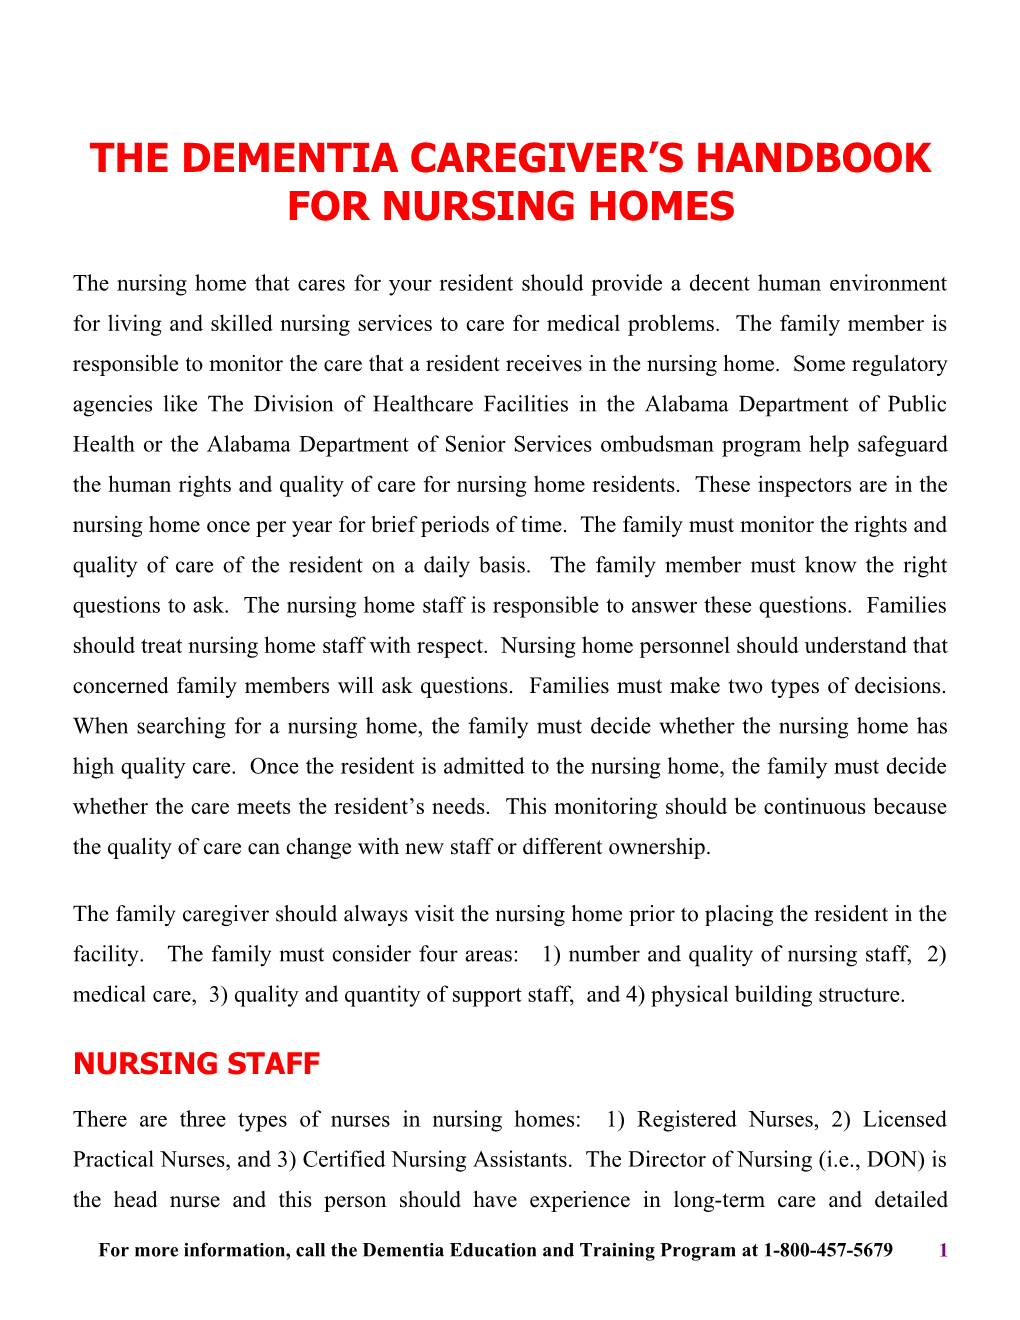 The S S of Success for Safe Nursing Home Placement for Dementia Patients